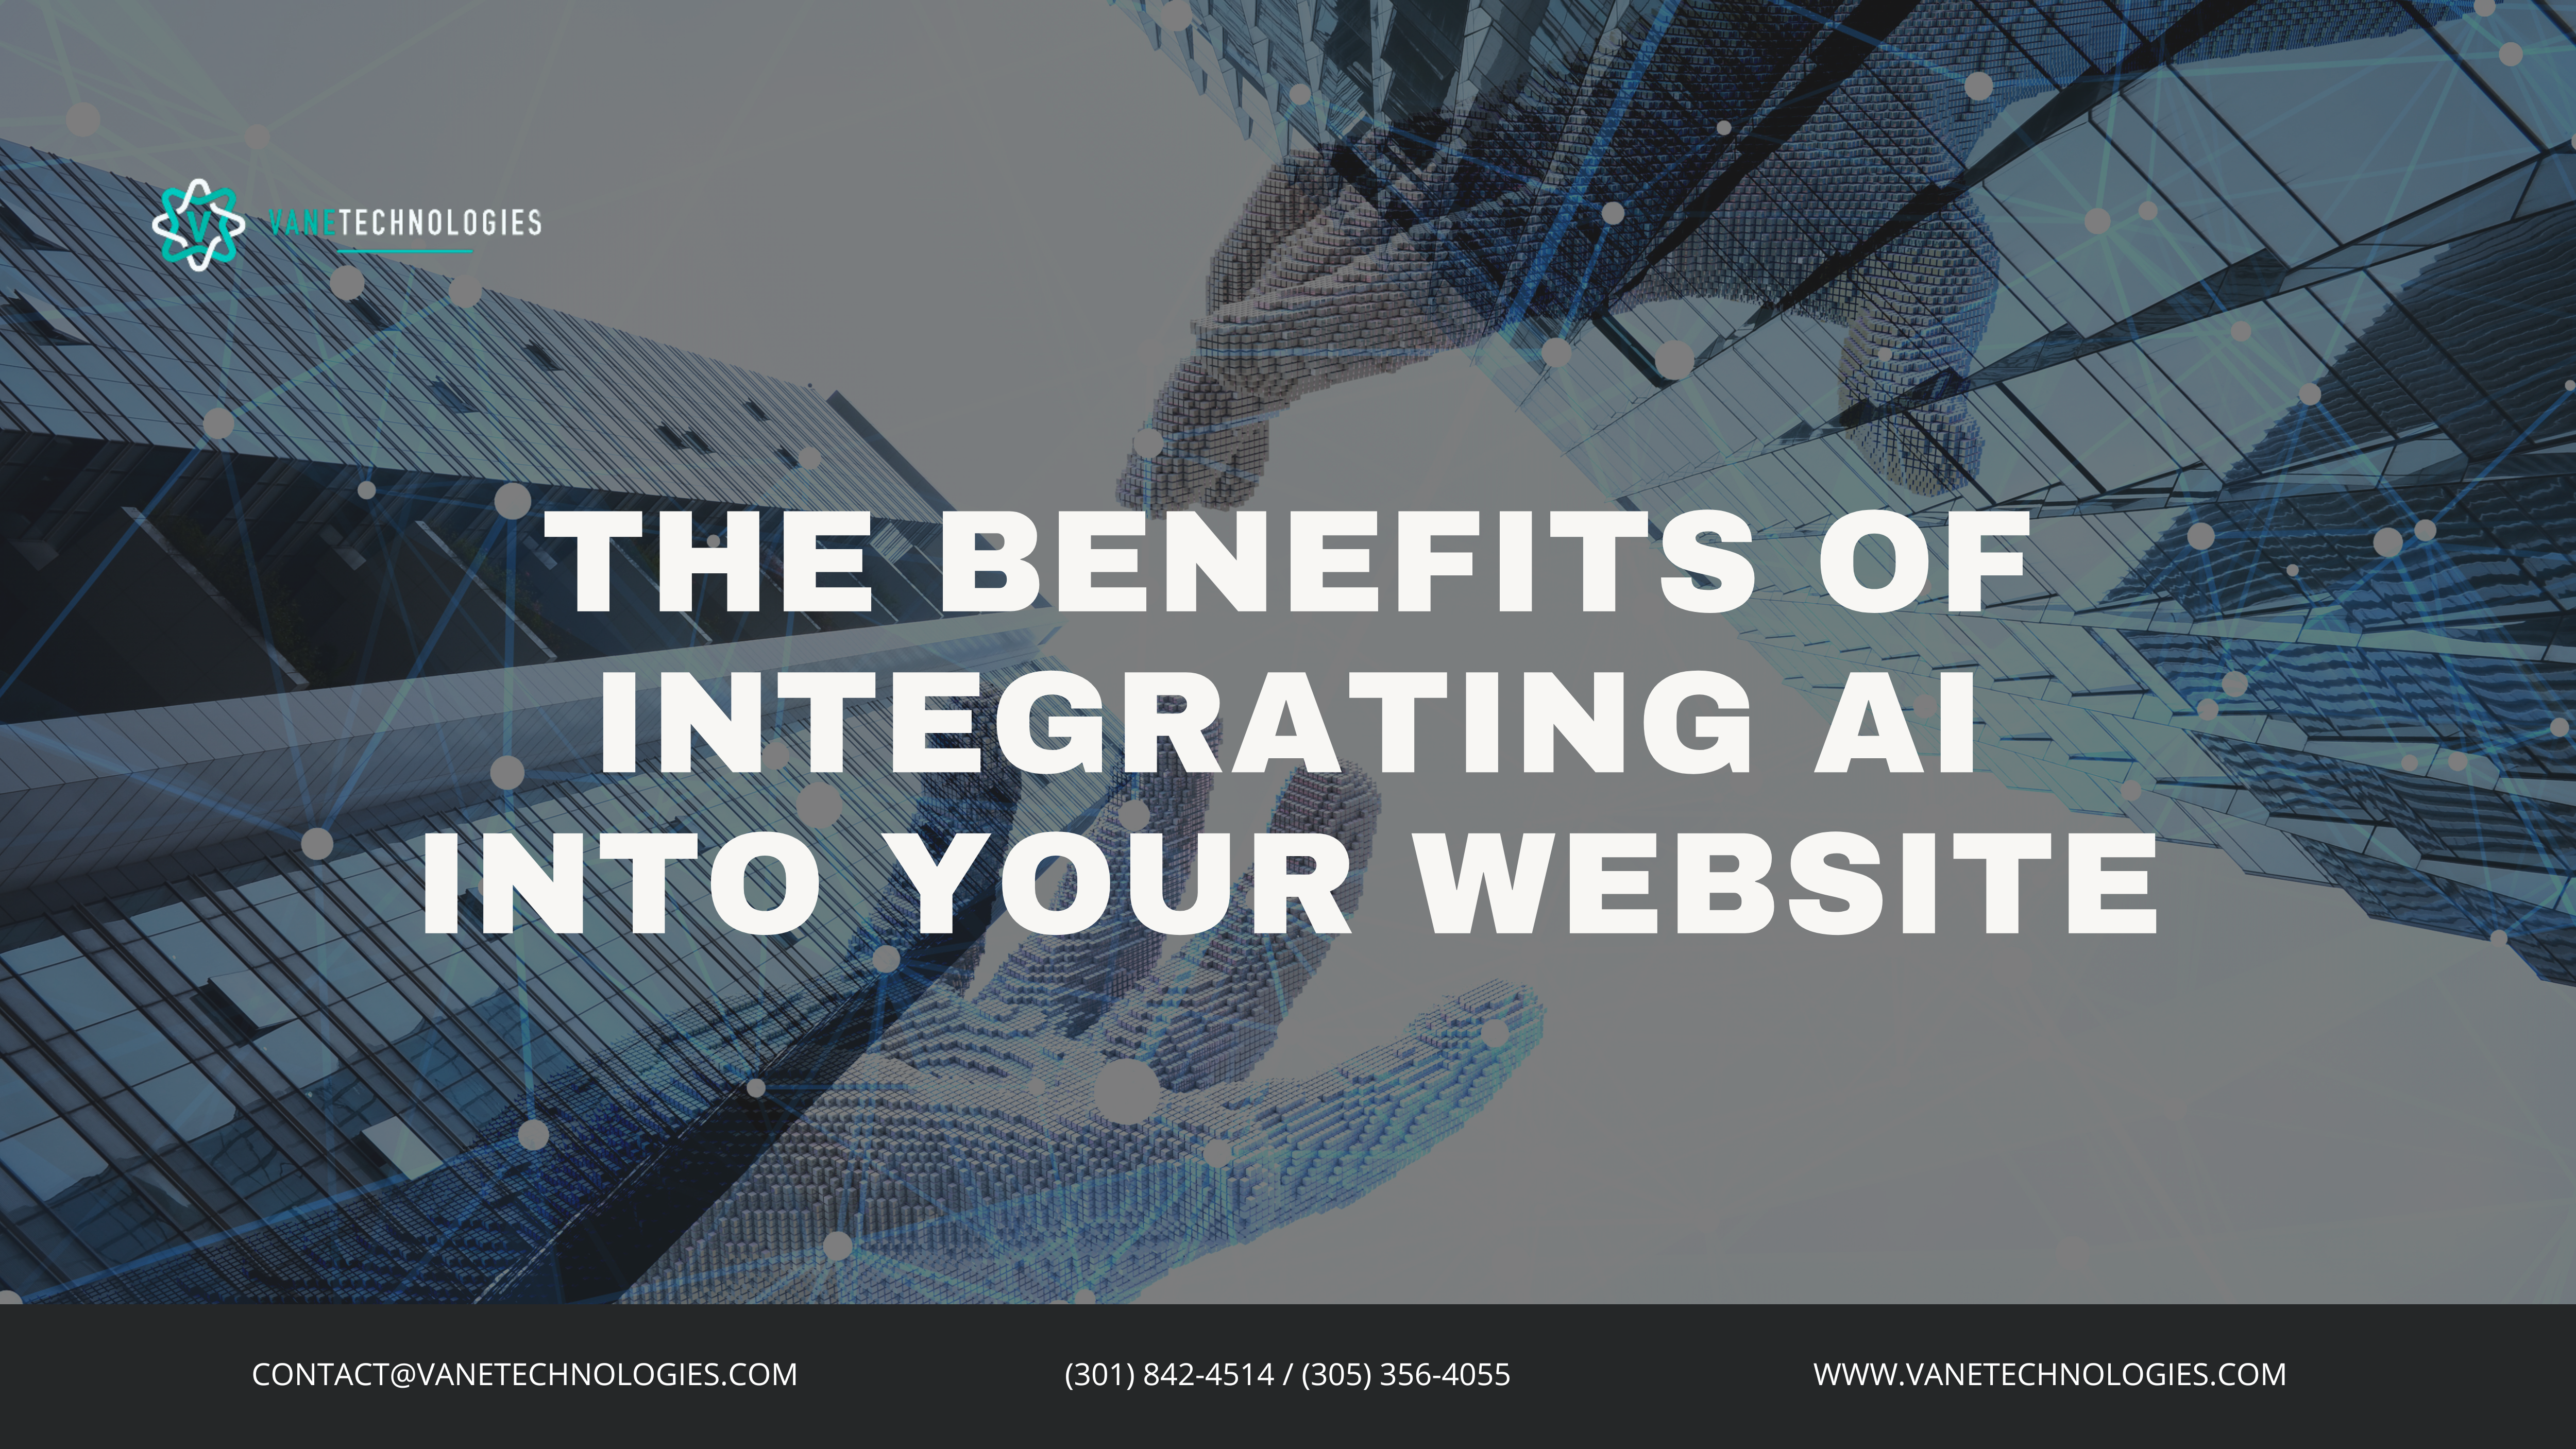 The Benefits of Integrating AI into Your Website